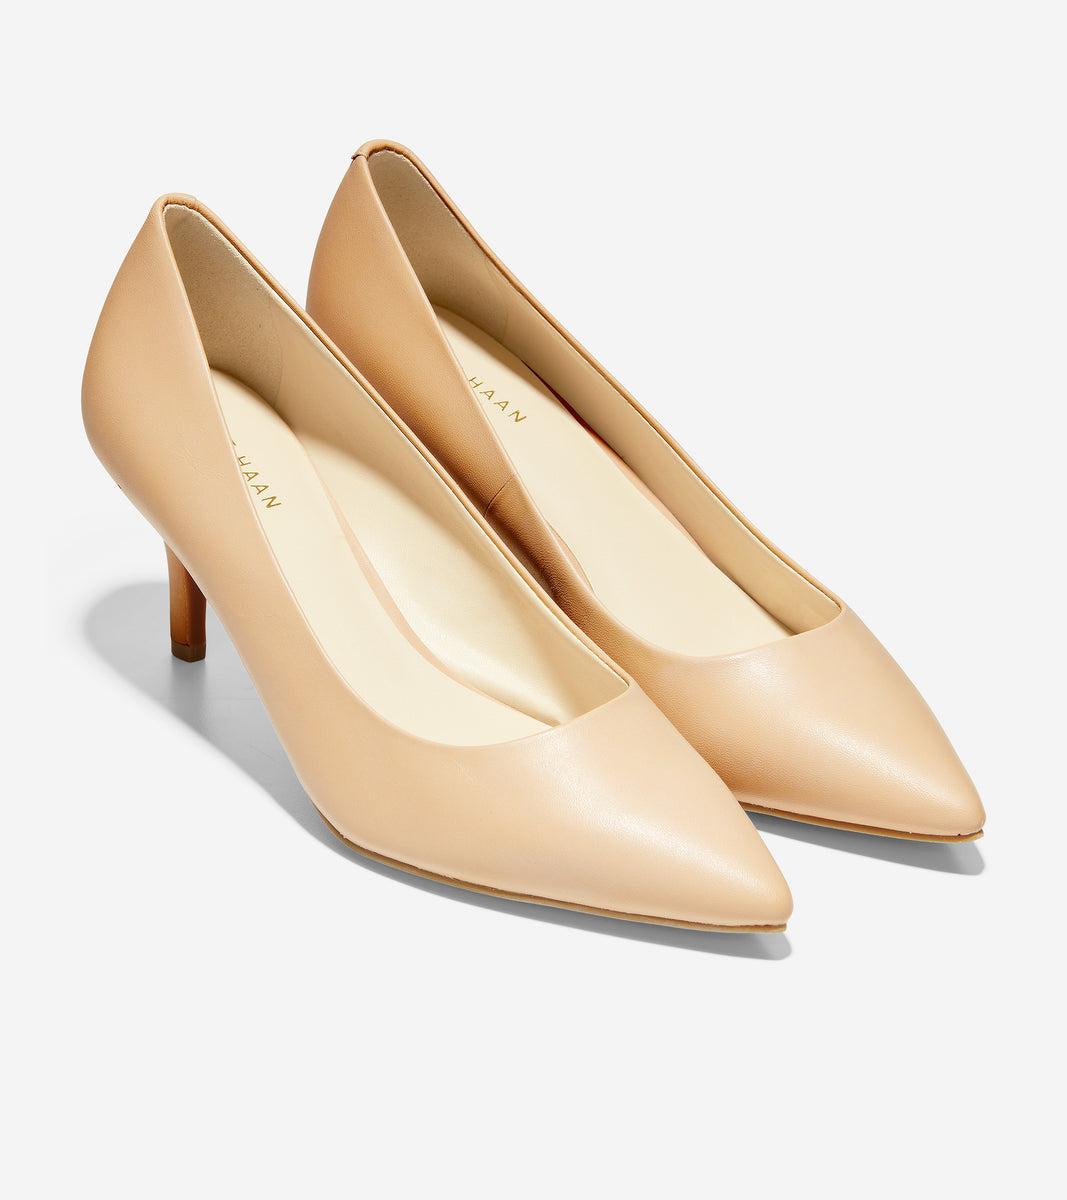 ColeHaan-Marta Pump (65mm)-w12391-Toasted Almond Leather